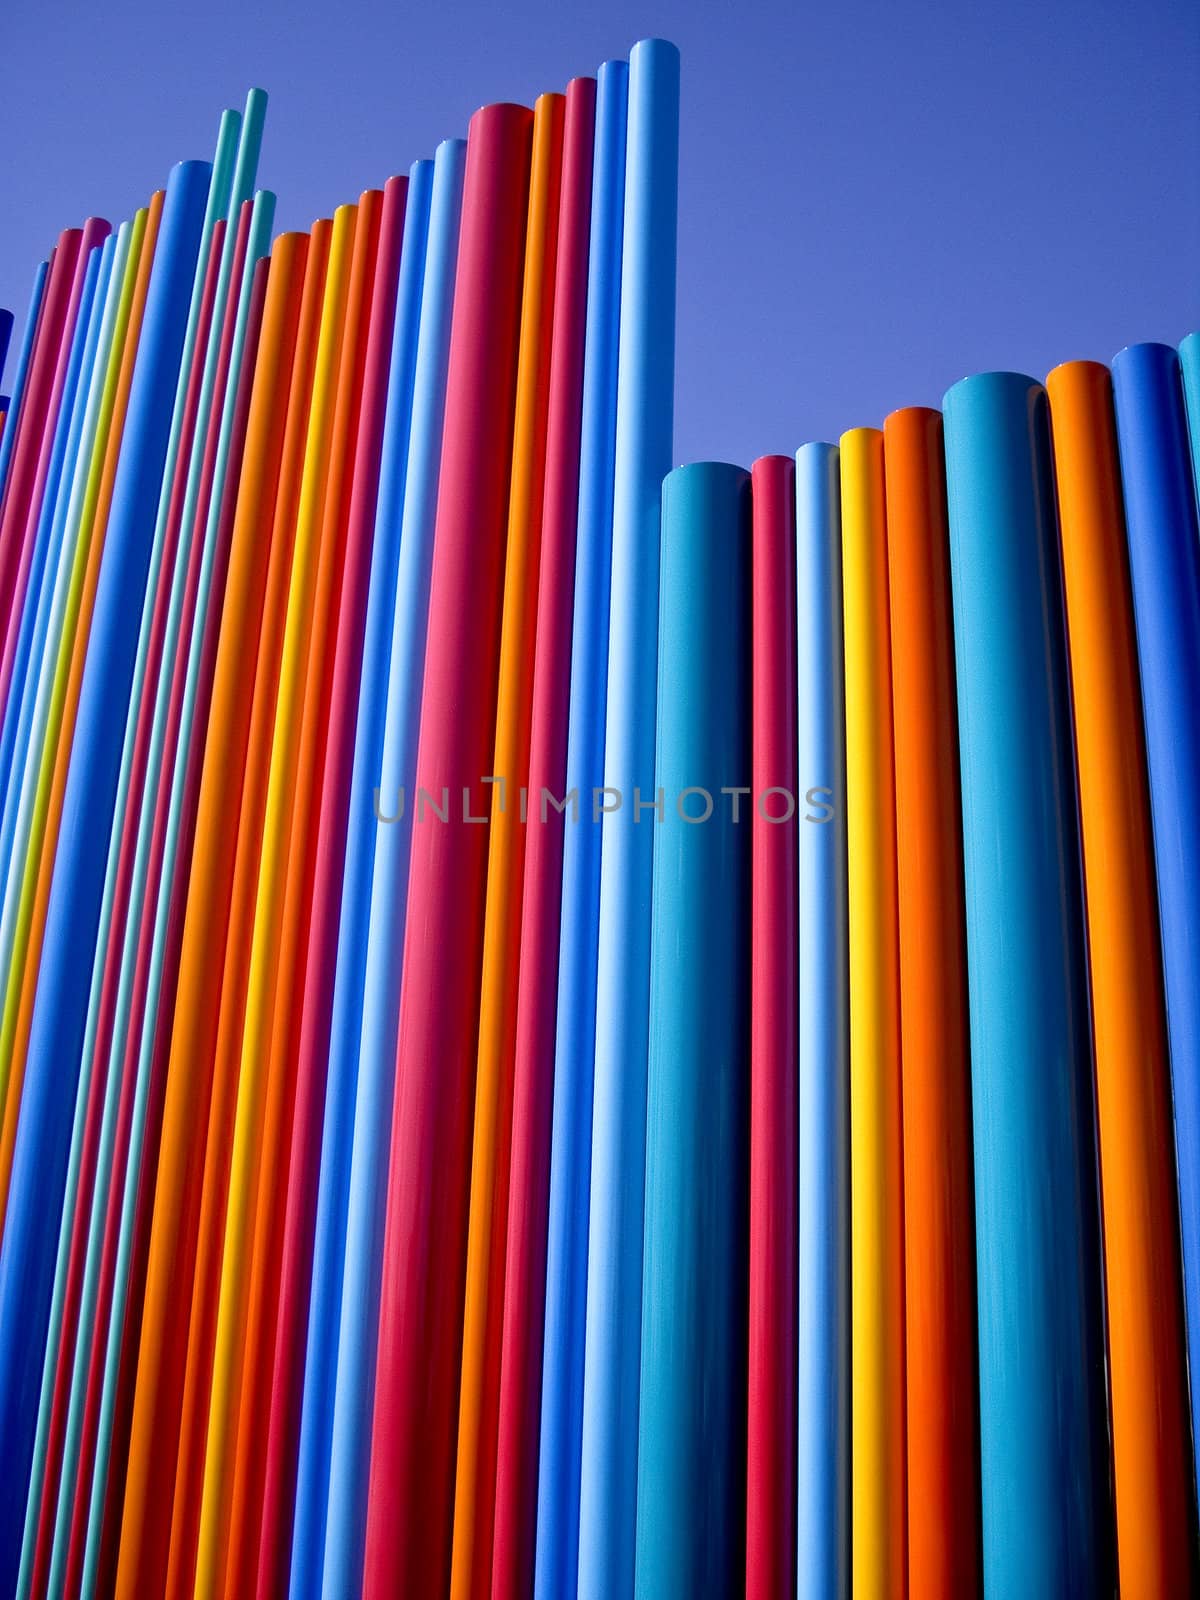 Shining poles of primary colors against the blue sky